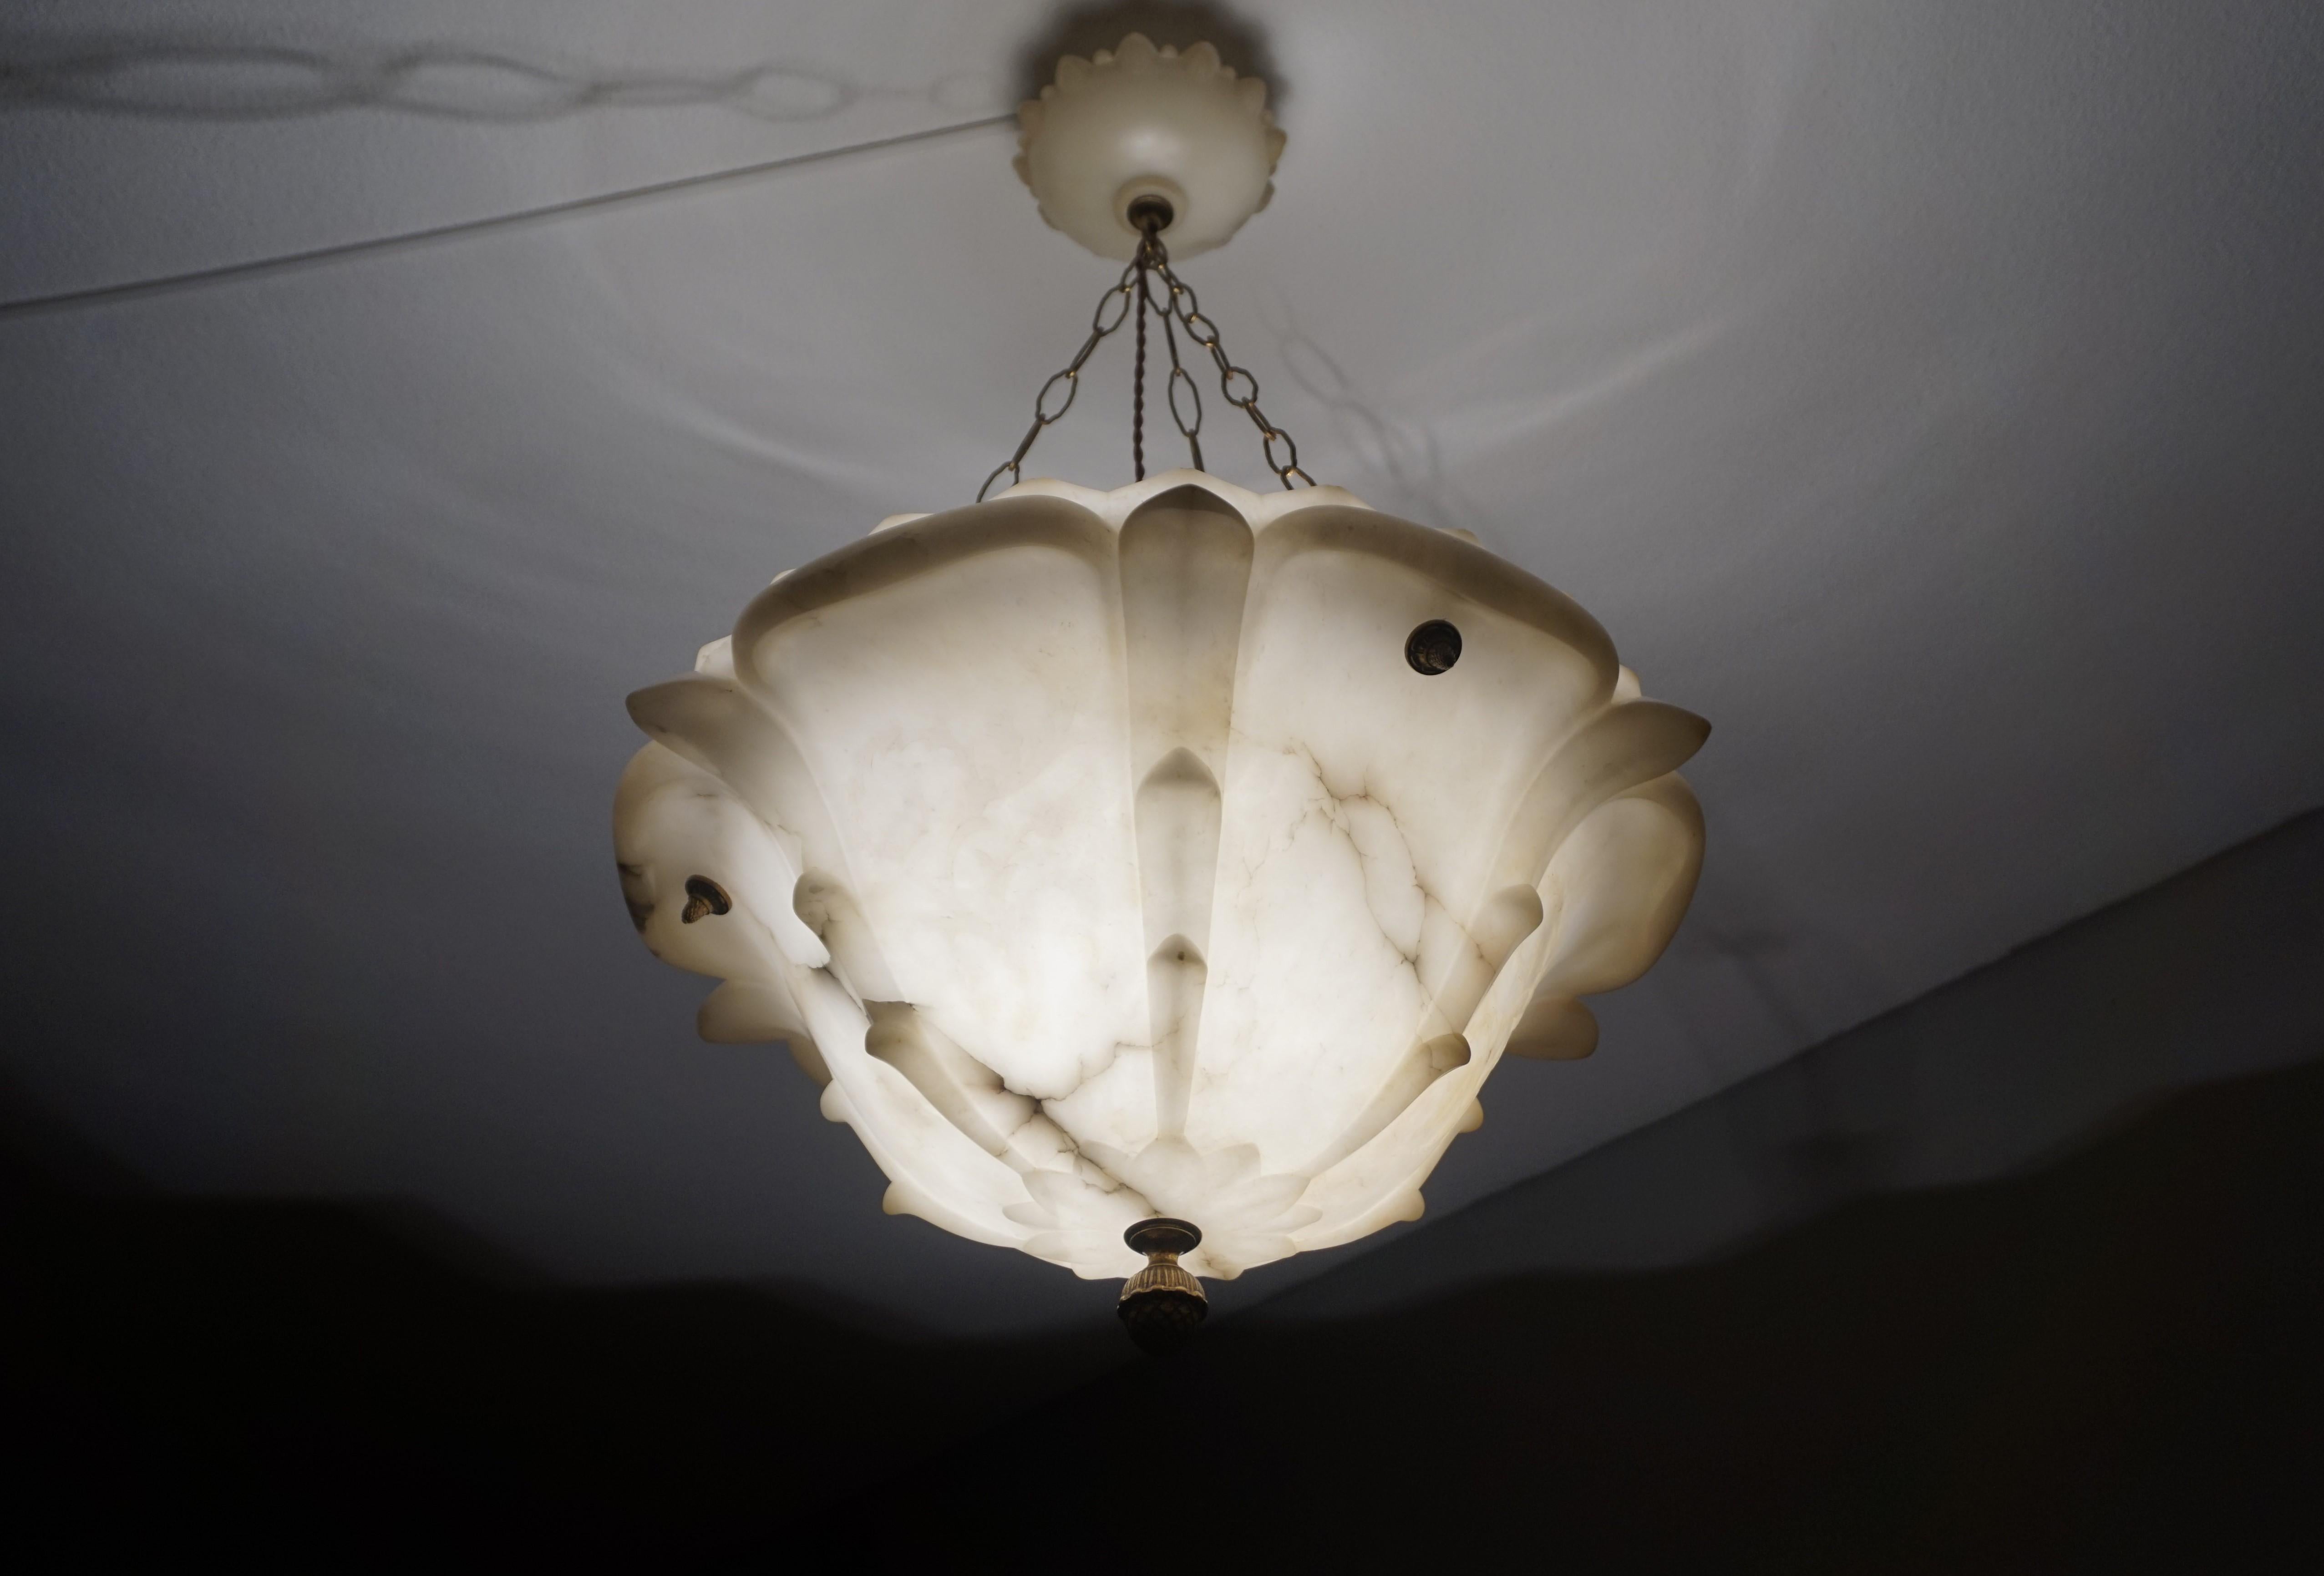 Enormous and aesthetically marvelous, alabaster flower sculpture pendant.

It is early in the new year, but we have already made a few new clients happy with some of our antique light fixtures and when we first saw this very large and deep alabaster